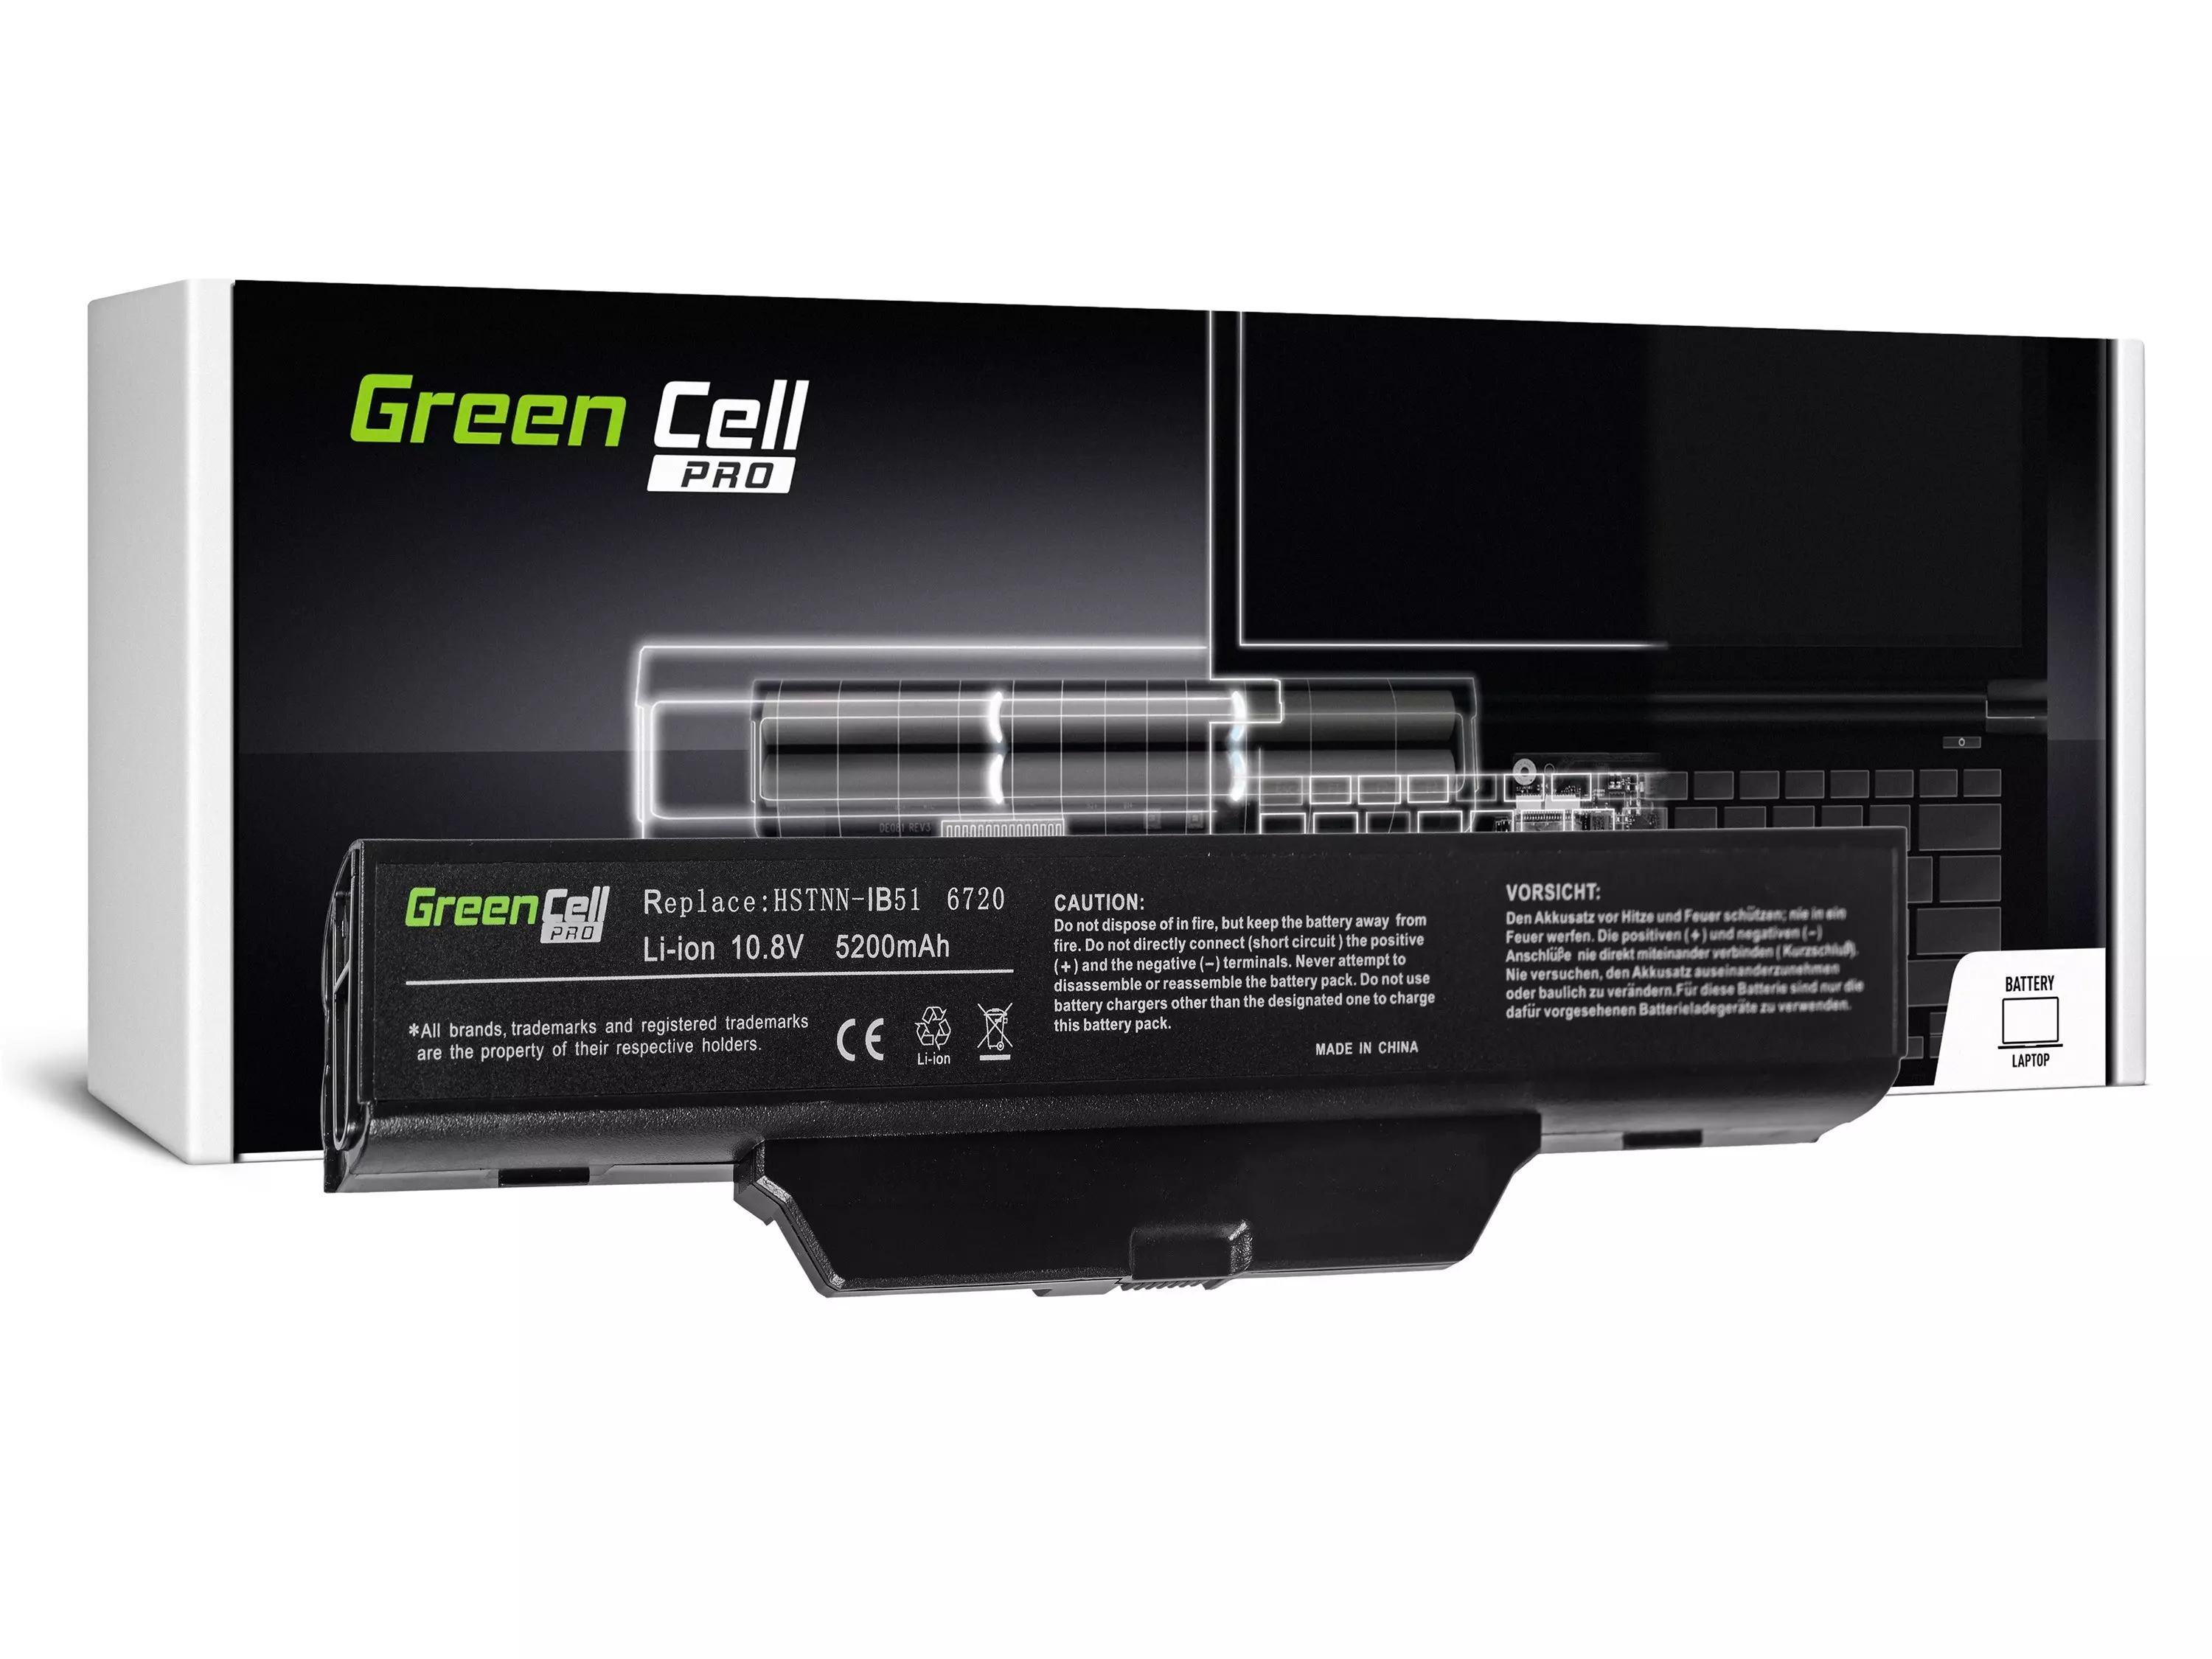 Green Cell PRO Battery for HP 550 610 HP Compaq 6720s 6820s / 11,1V 5200mAh